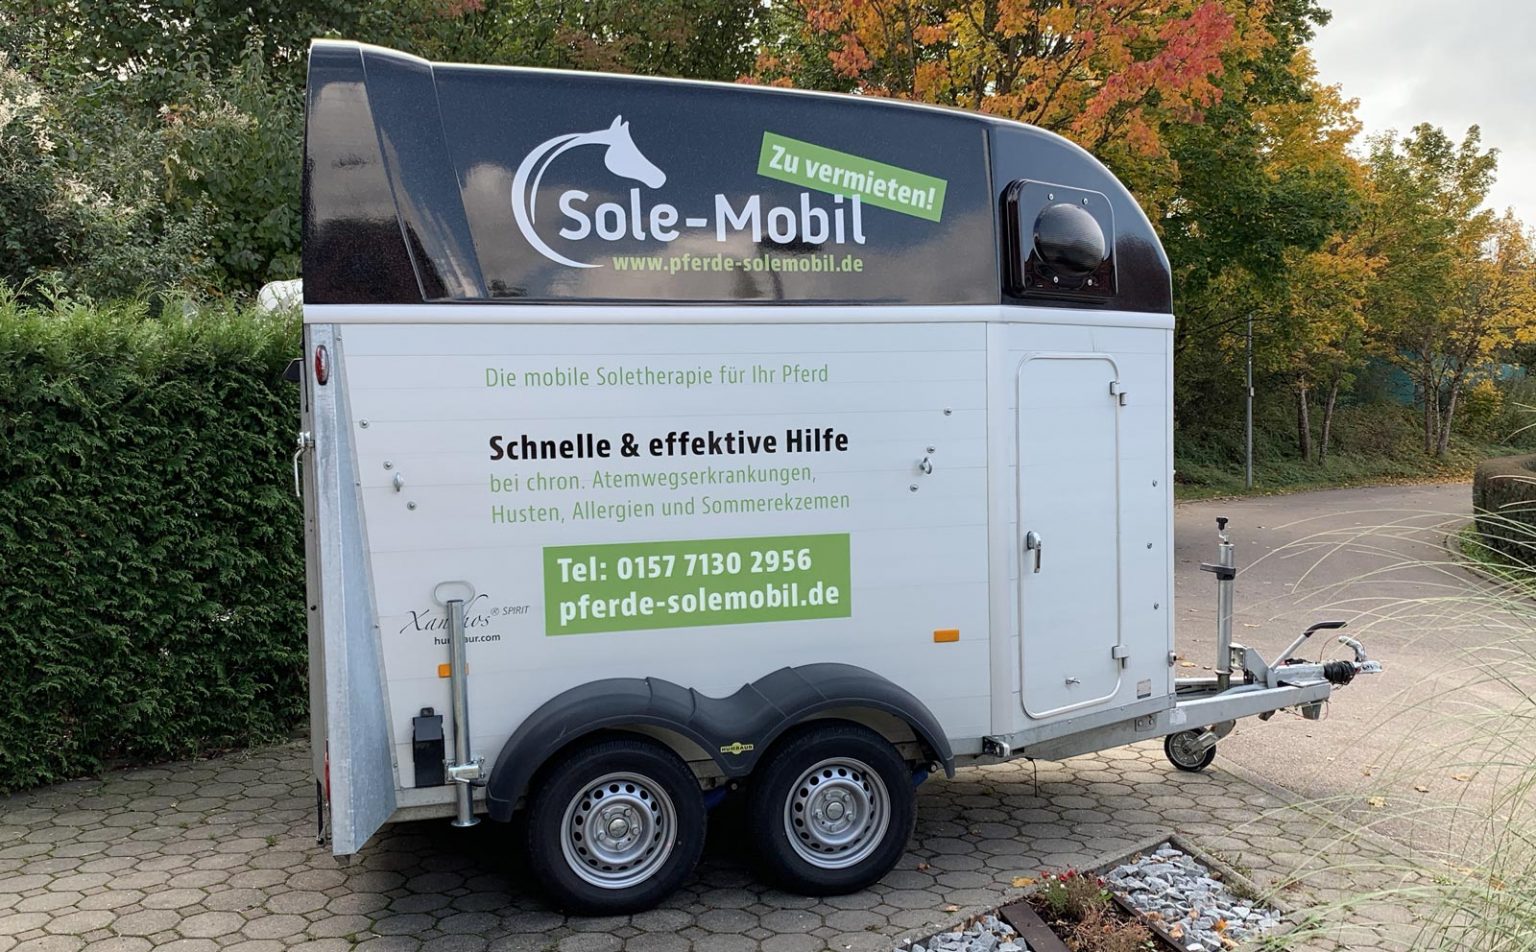 Sole-Mobil